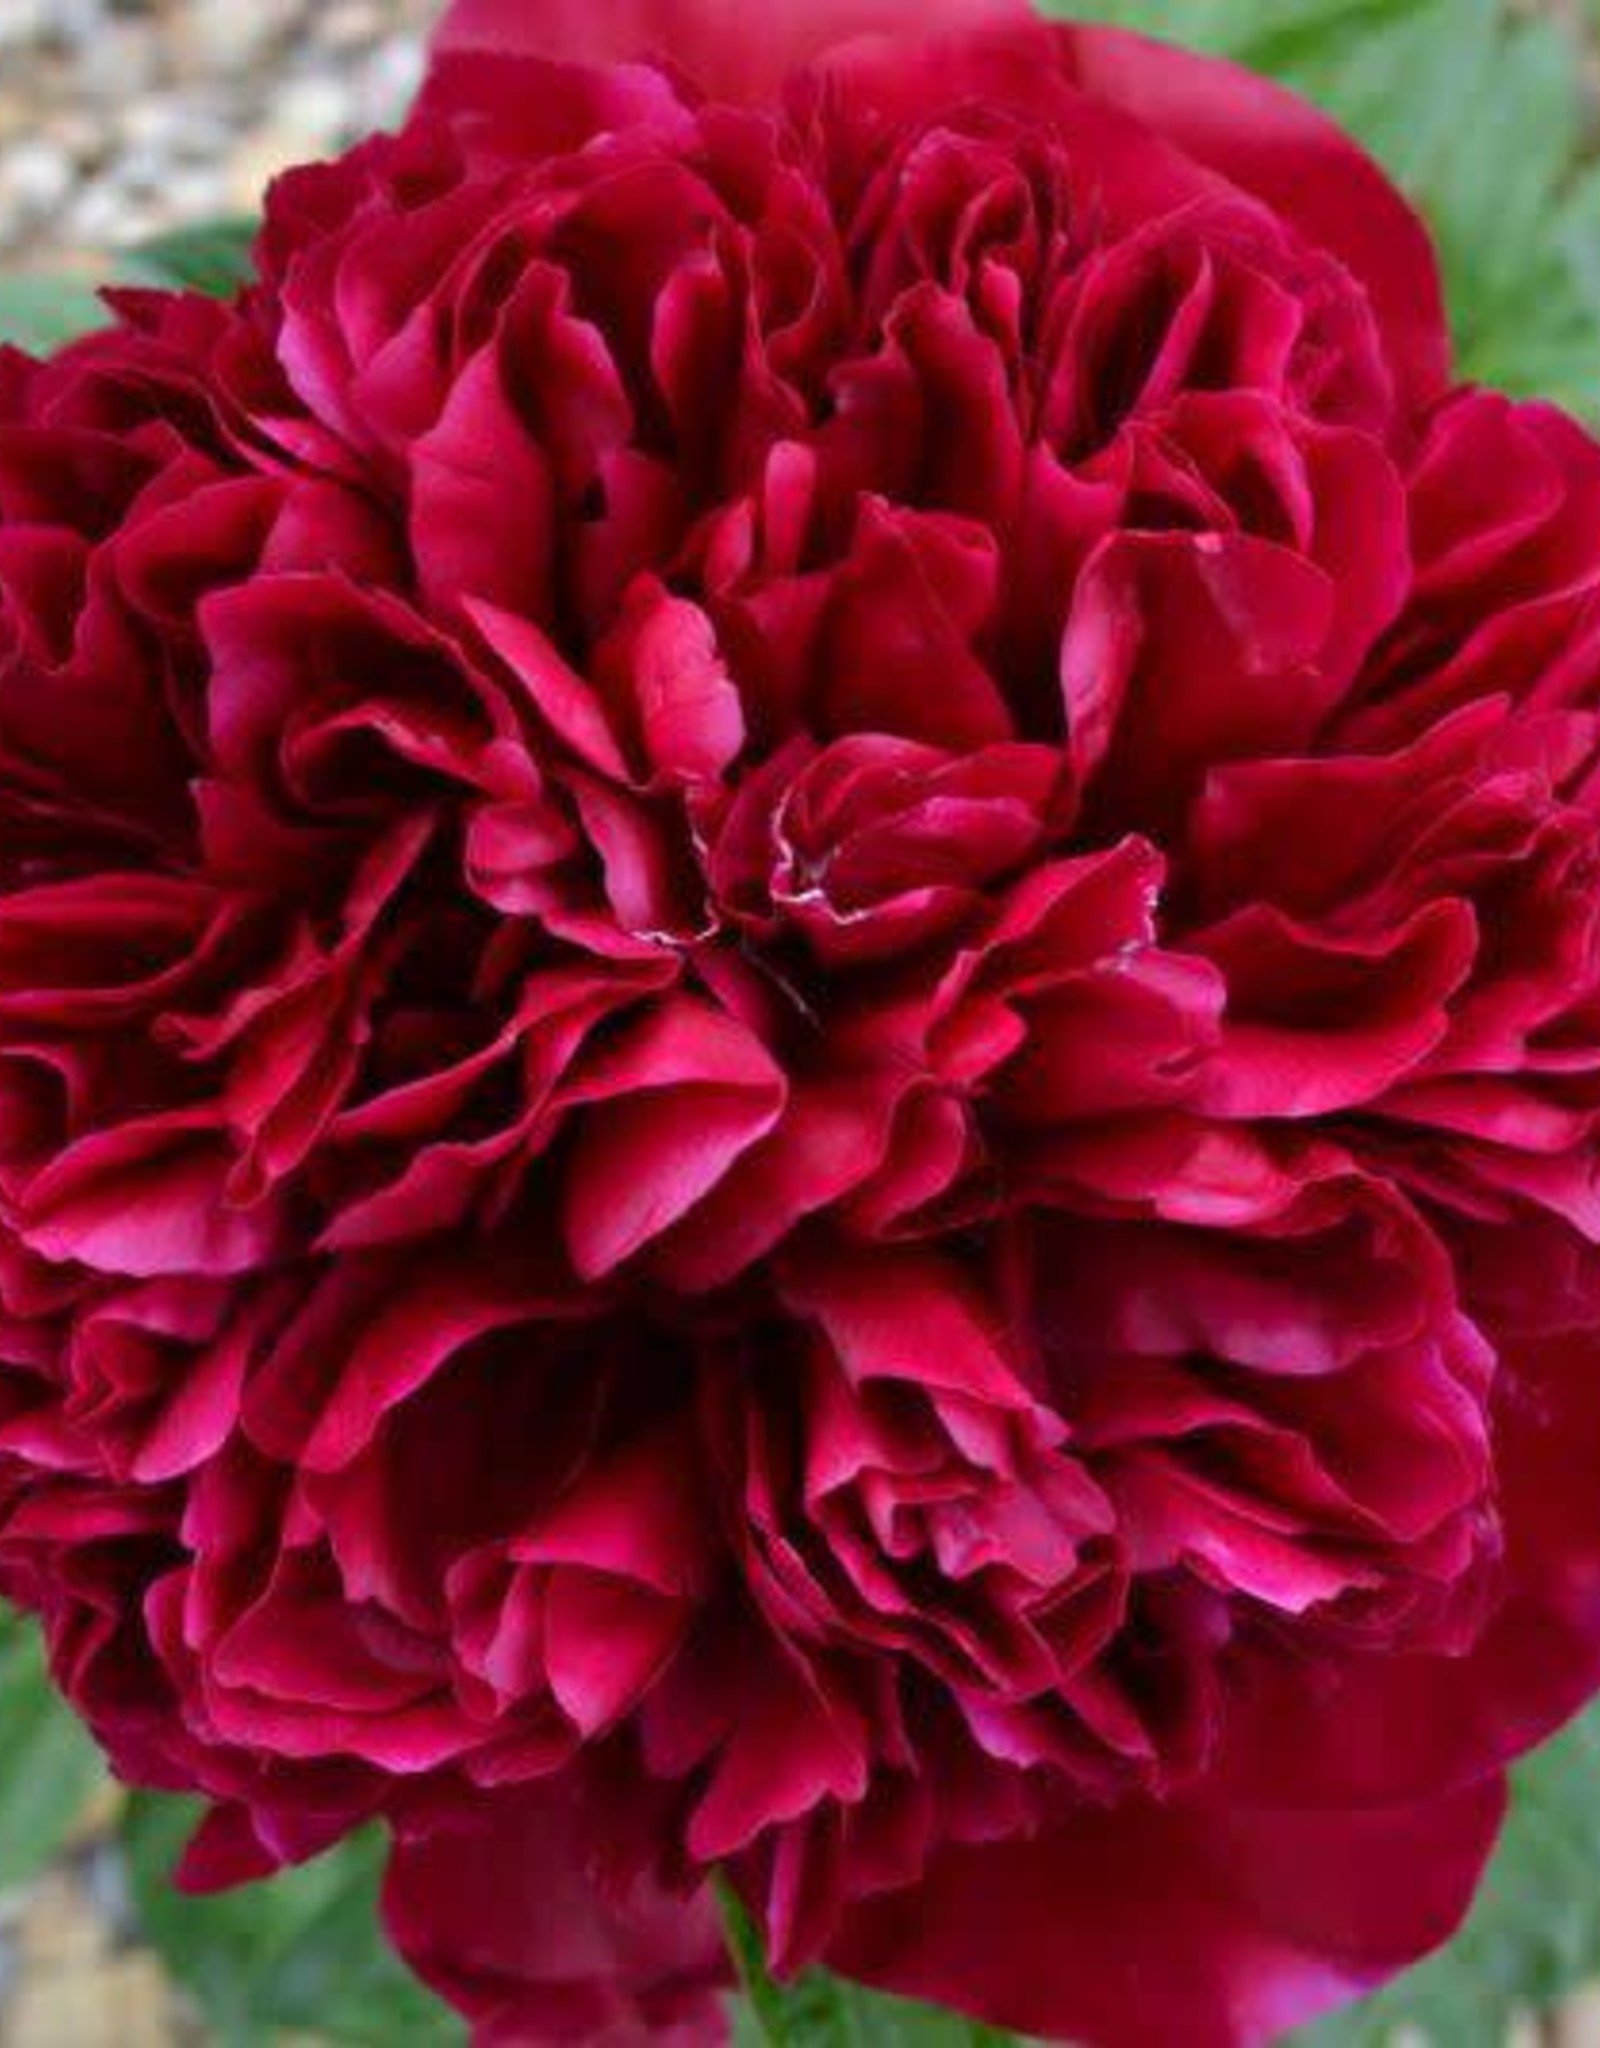 Bron and Sons Paeonia officinalis 'Rubra Plena' #1 Peony Red Memorial Day